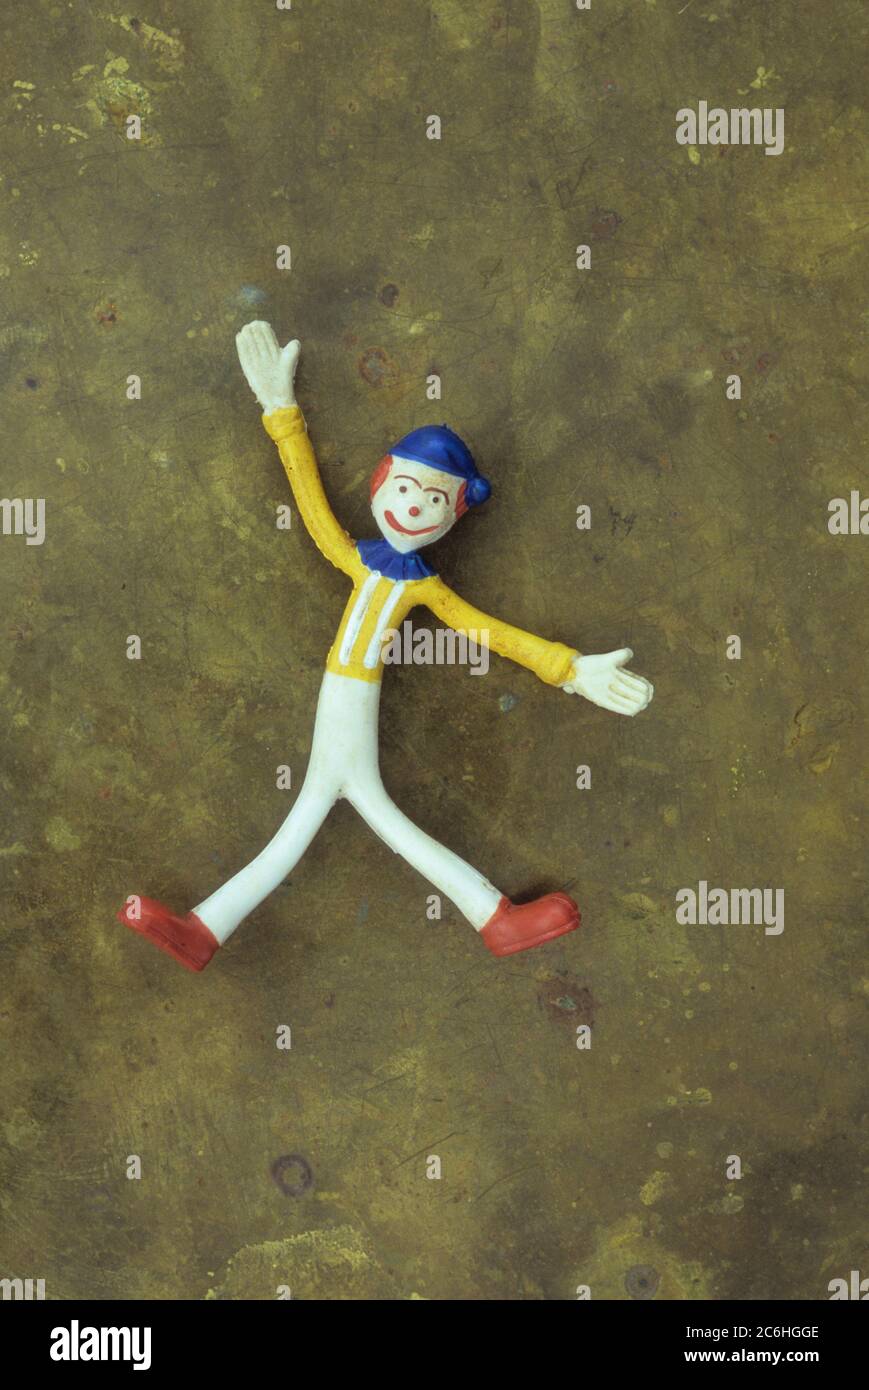 Bendy figure model of happy clown or teenager with arms outspread and legs apart with background of tarnished brass Stock Photo